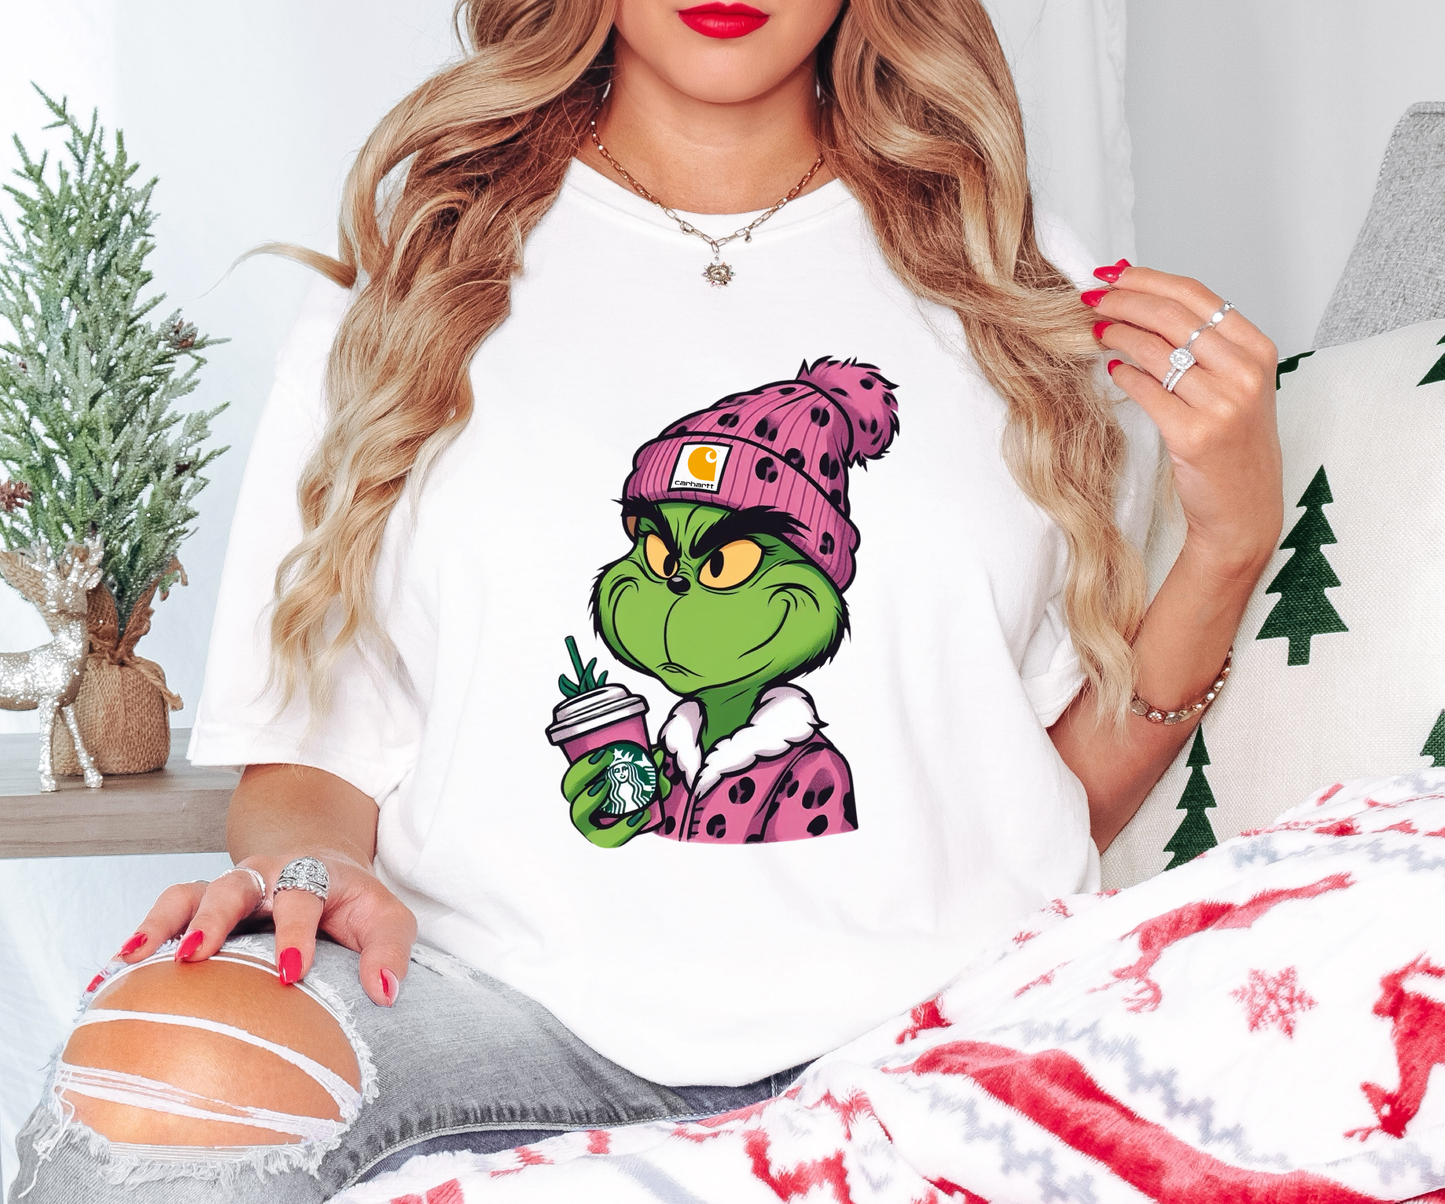 a woman wearing a white shirt with a cartoon character on it